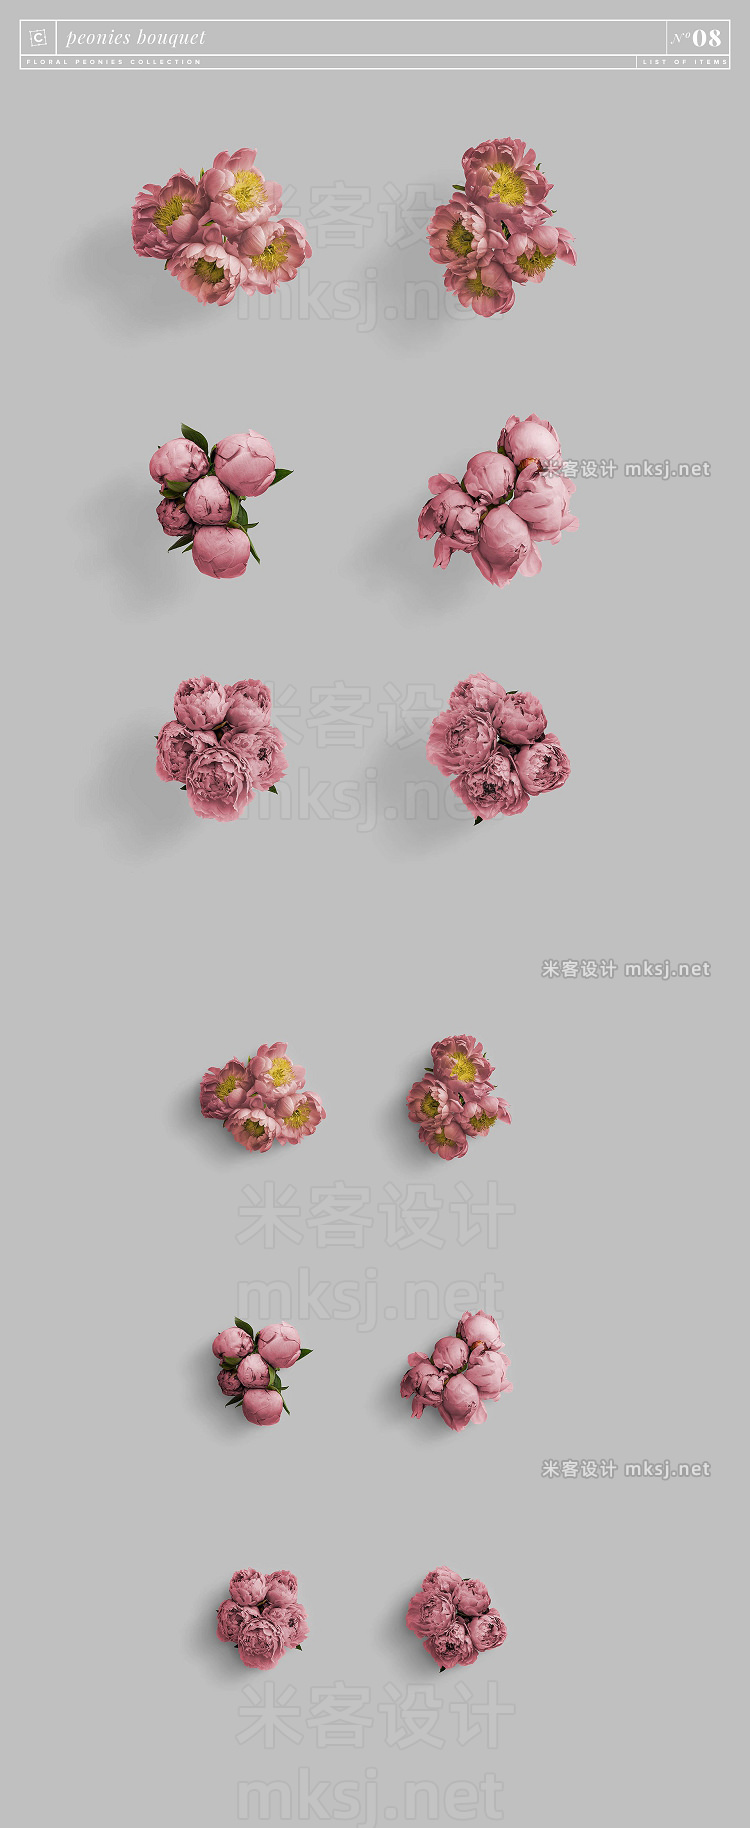 png素材 Floral Peonies Collection